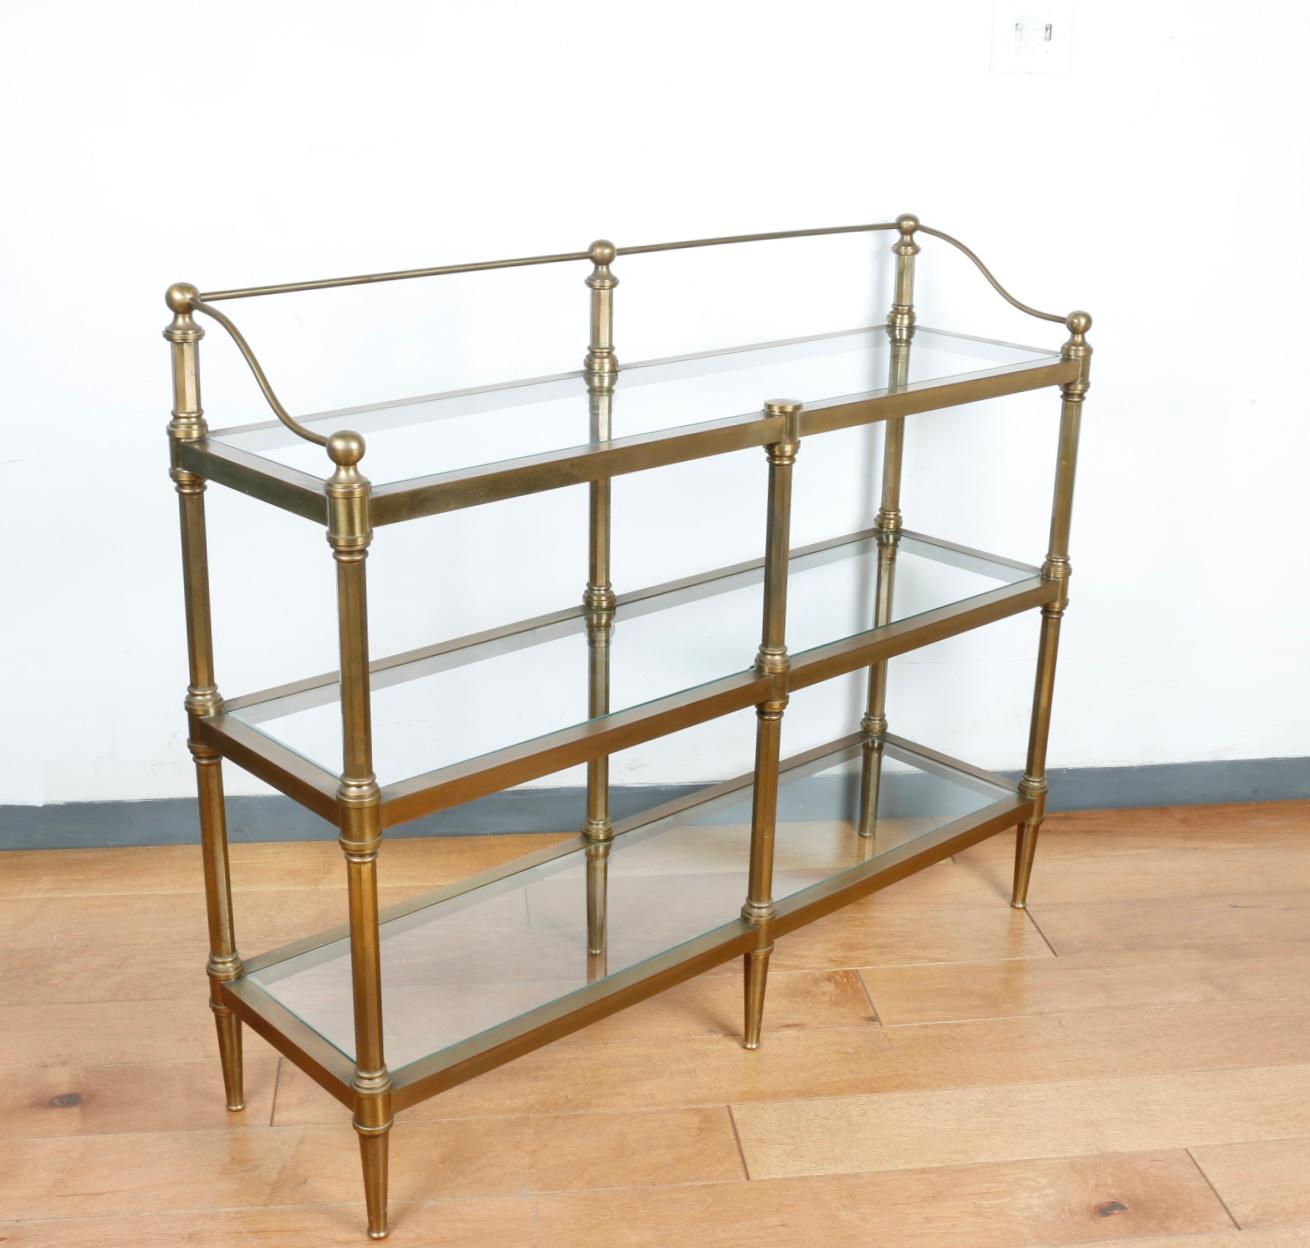 Gorgeous solid heavy brass 3 tier shelve with glass removable shelves. All well kept and sturdy. No broken parts or chips. Great for any entrance or hallway. Solid well made detailed brass.